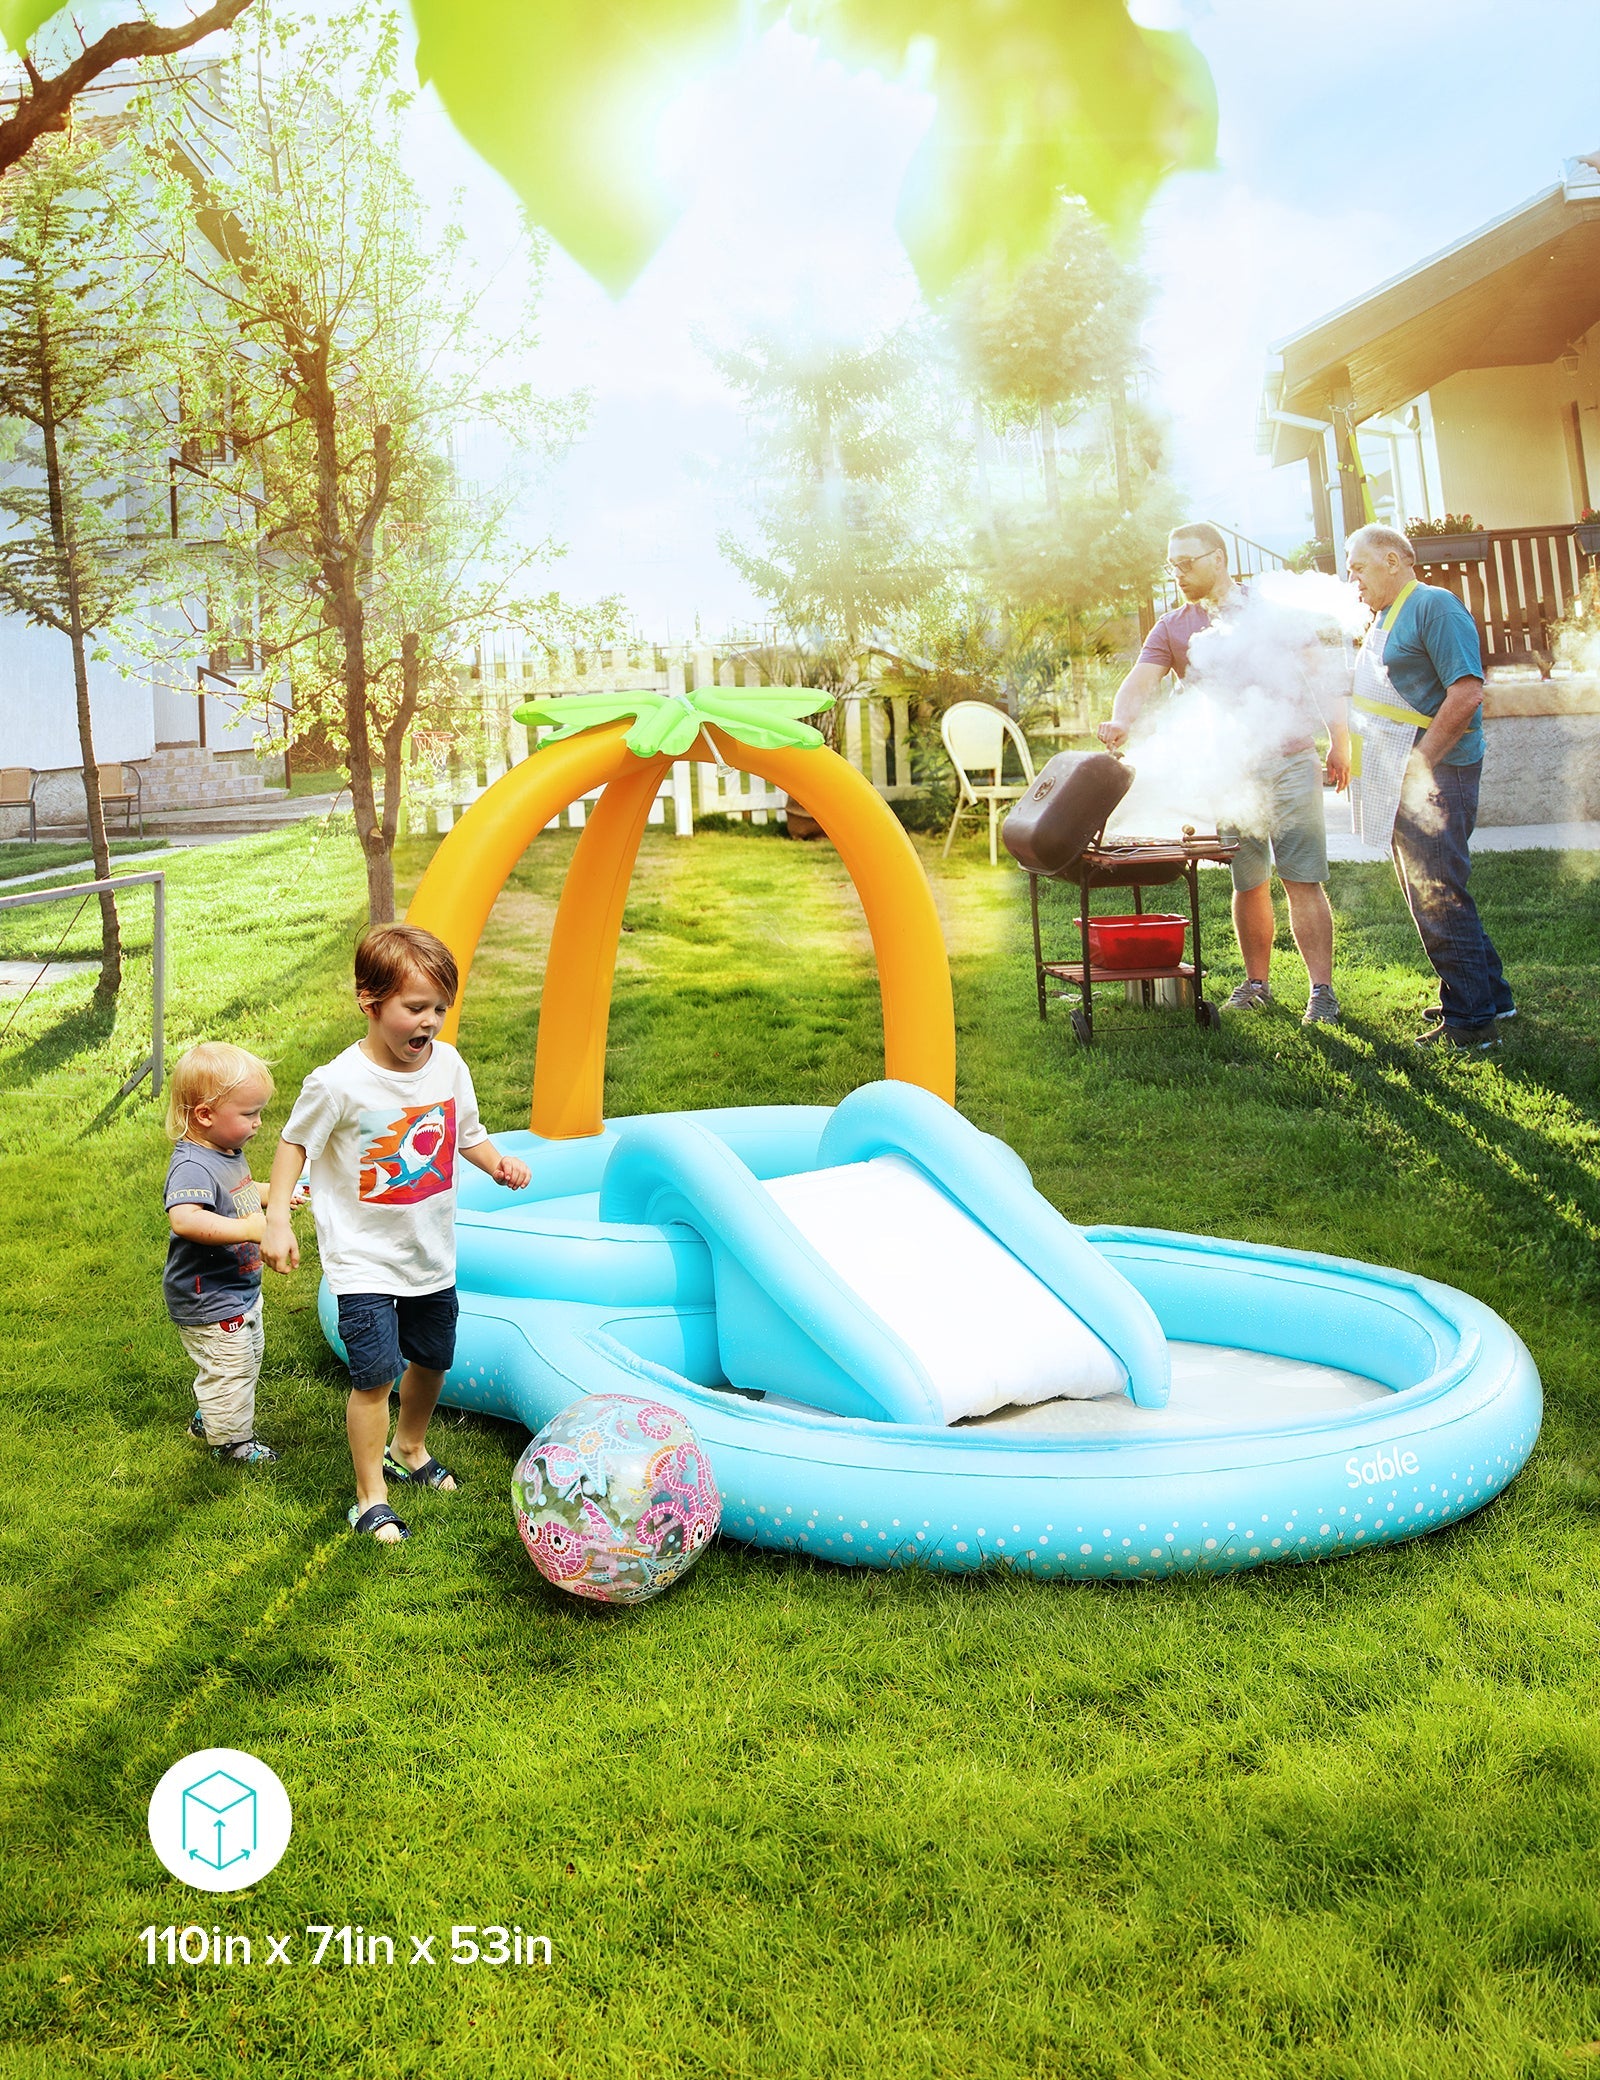 Sable Inflatable Play Center Wading Pool with Slide for Kids Children Garden Backyard 110” x 71” x 53”